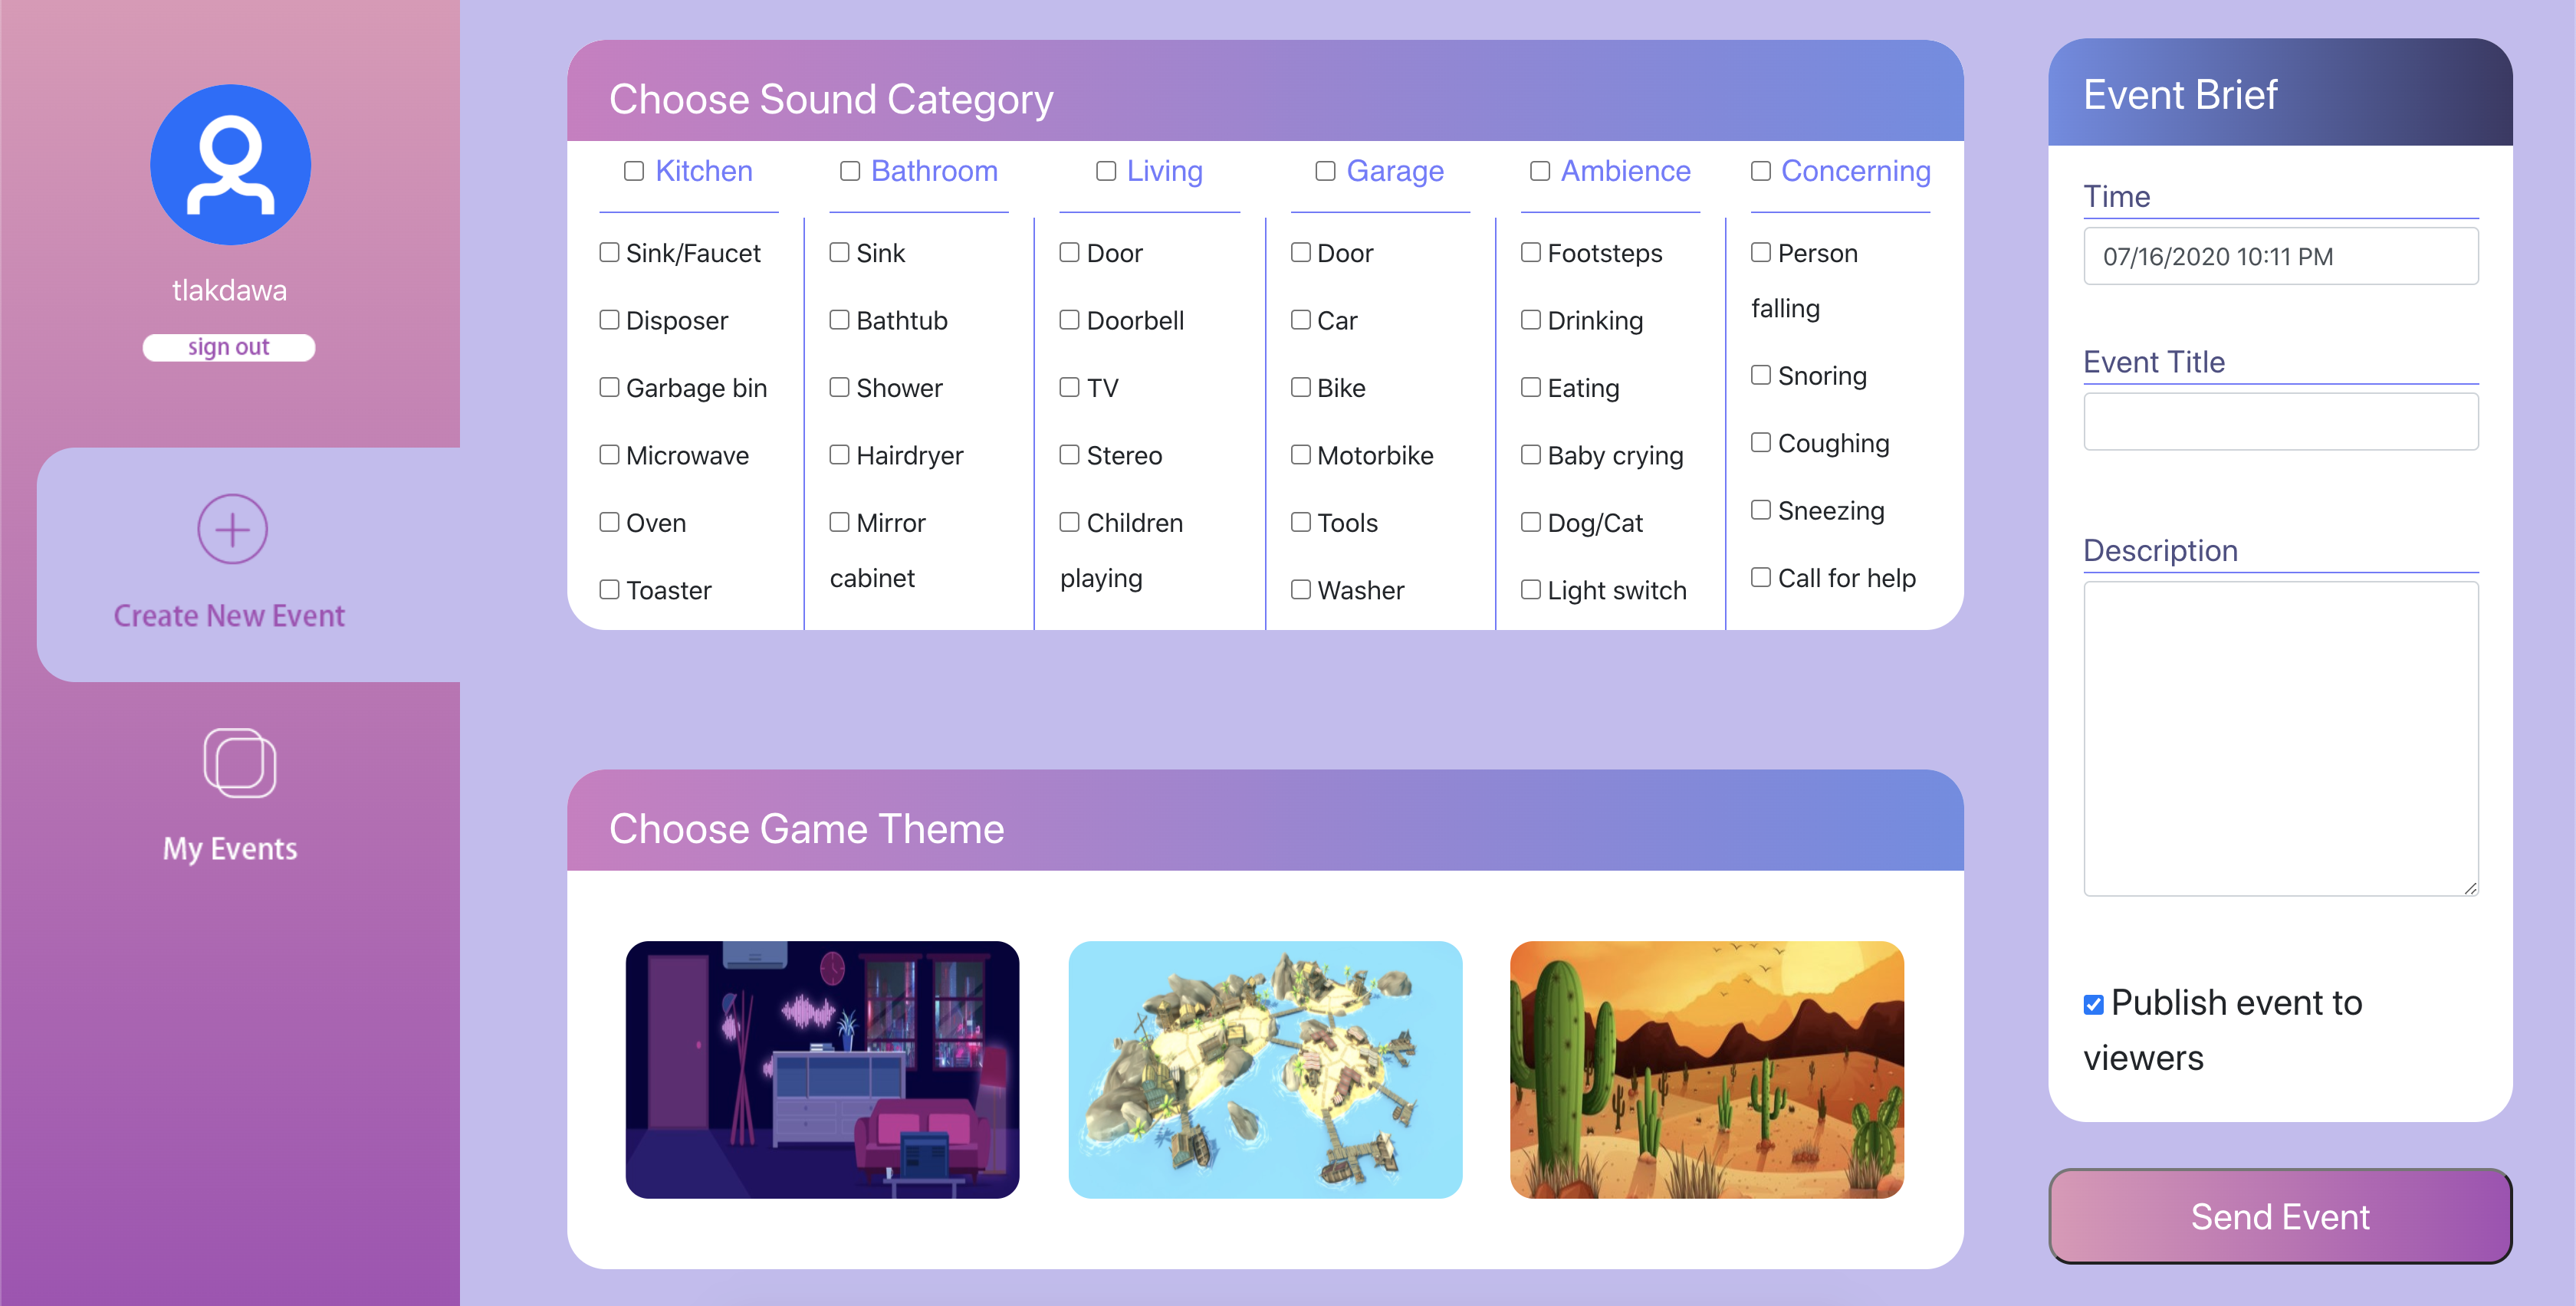 Choose the sound categories